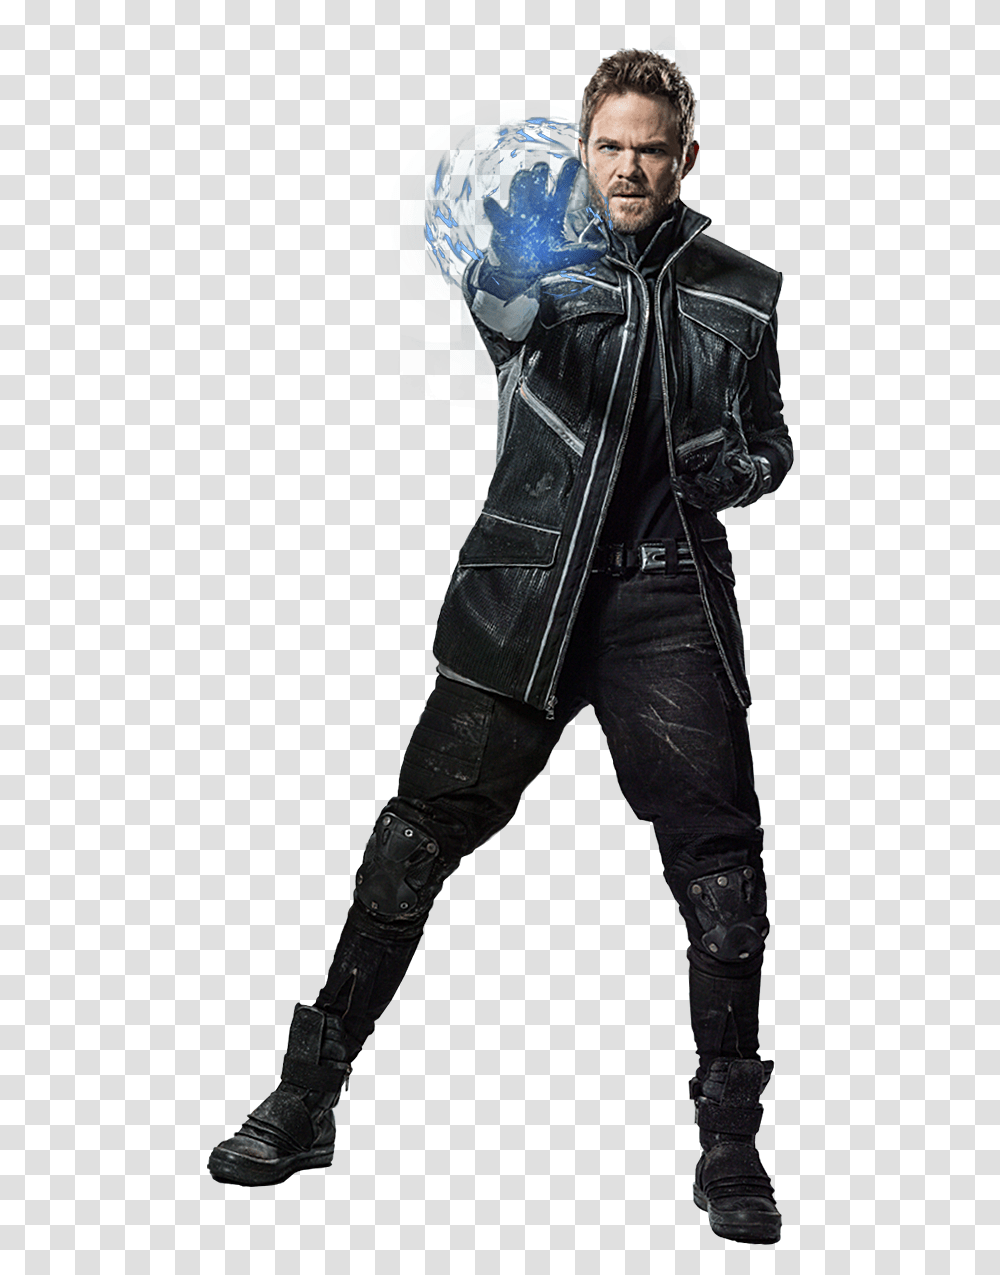 Background Hq Image X Men Movie Iceman, Clothing, Jacket, Coat, Person Transparent Png